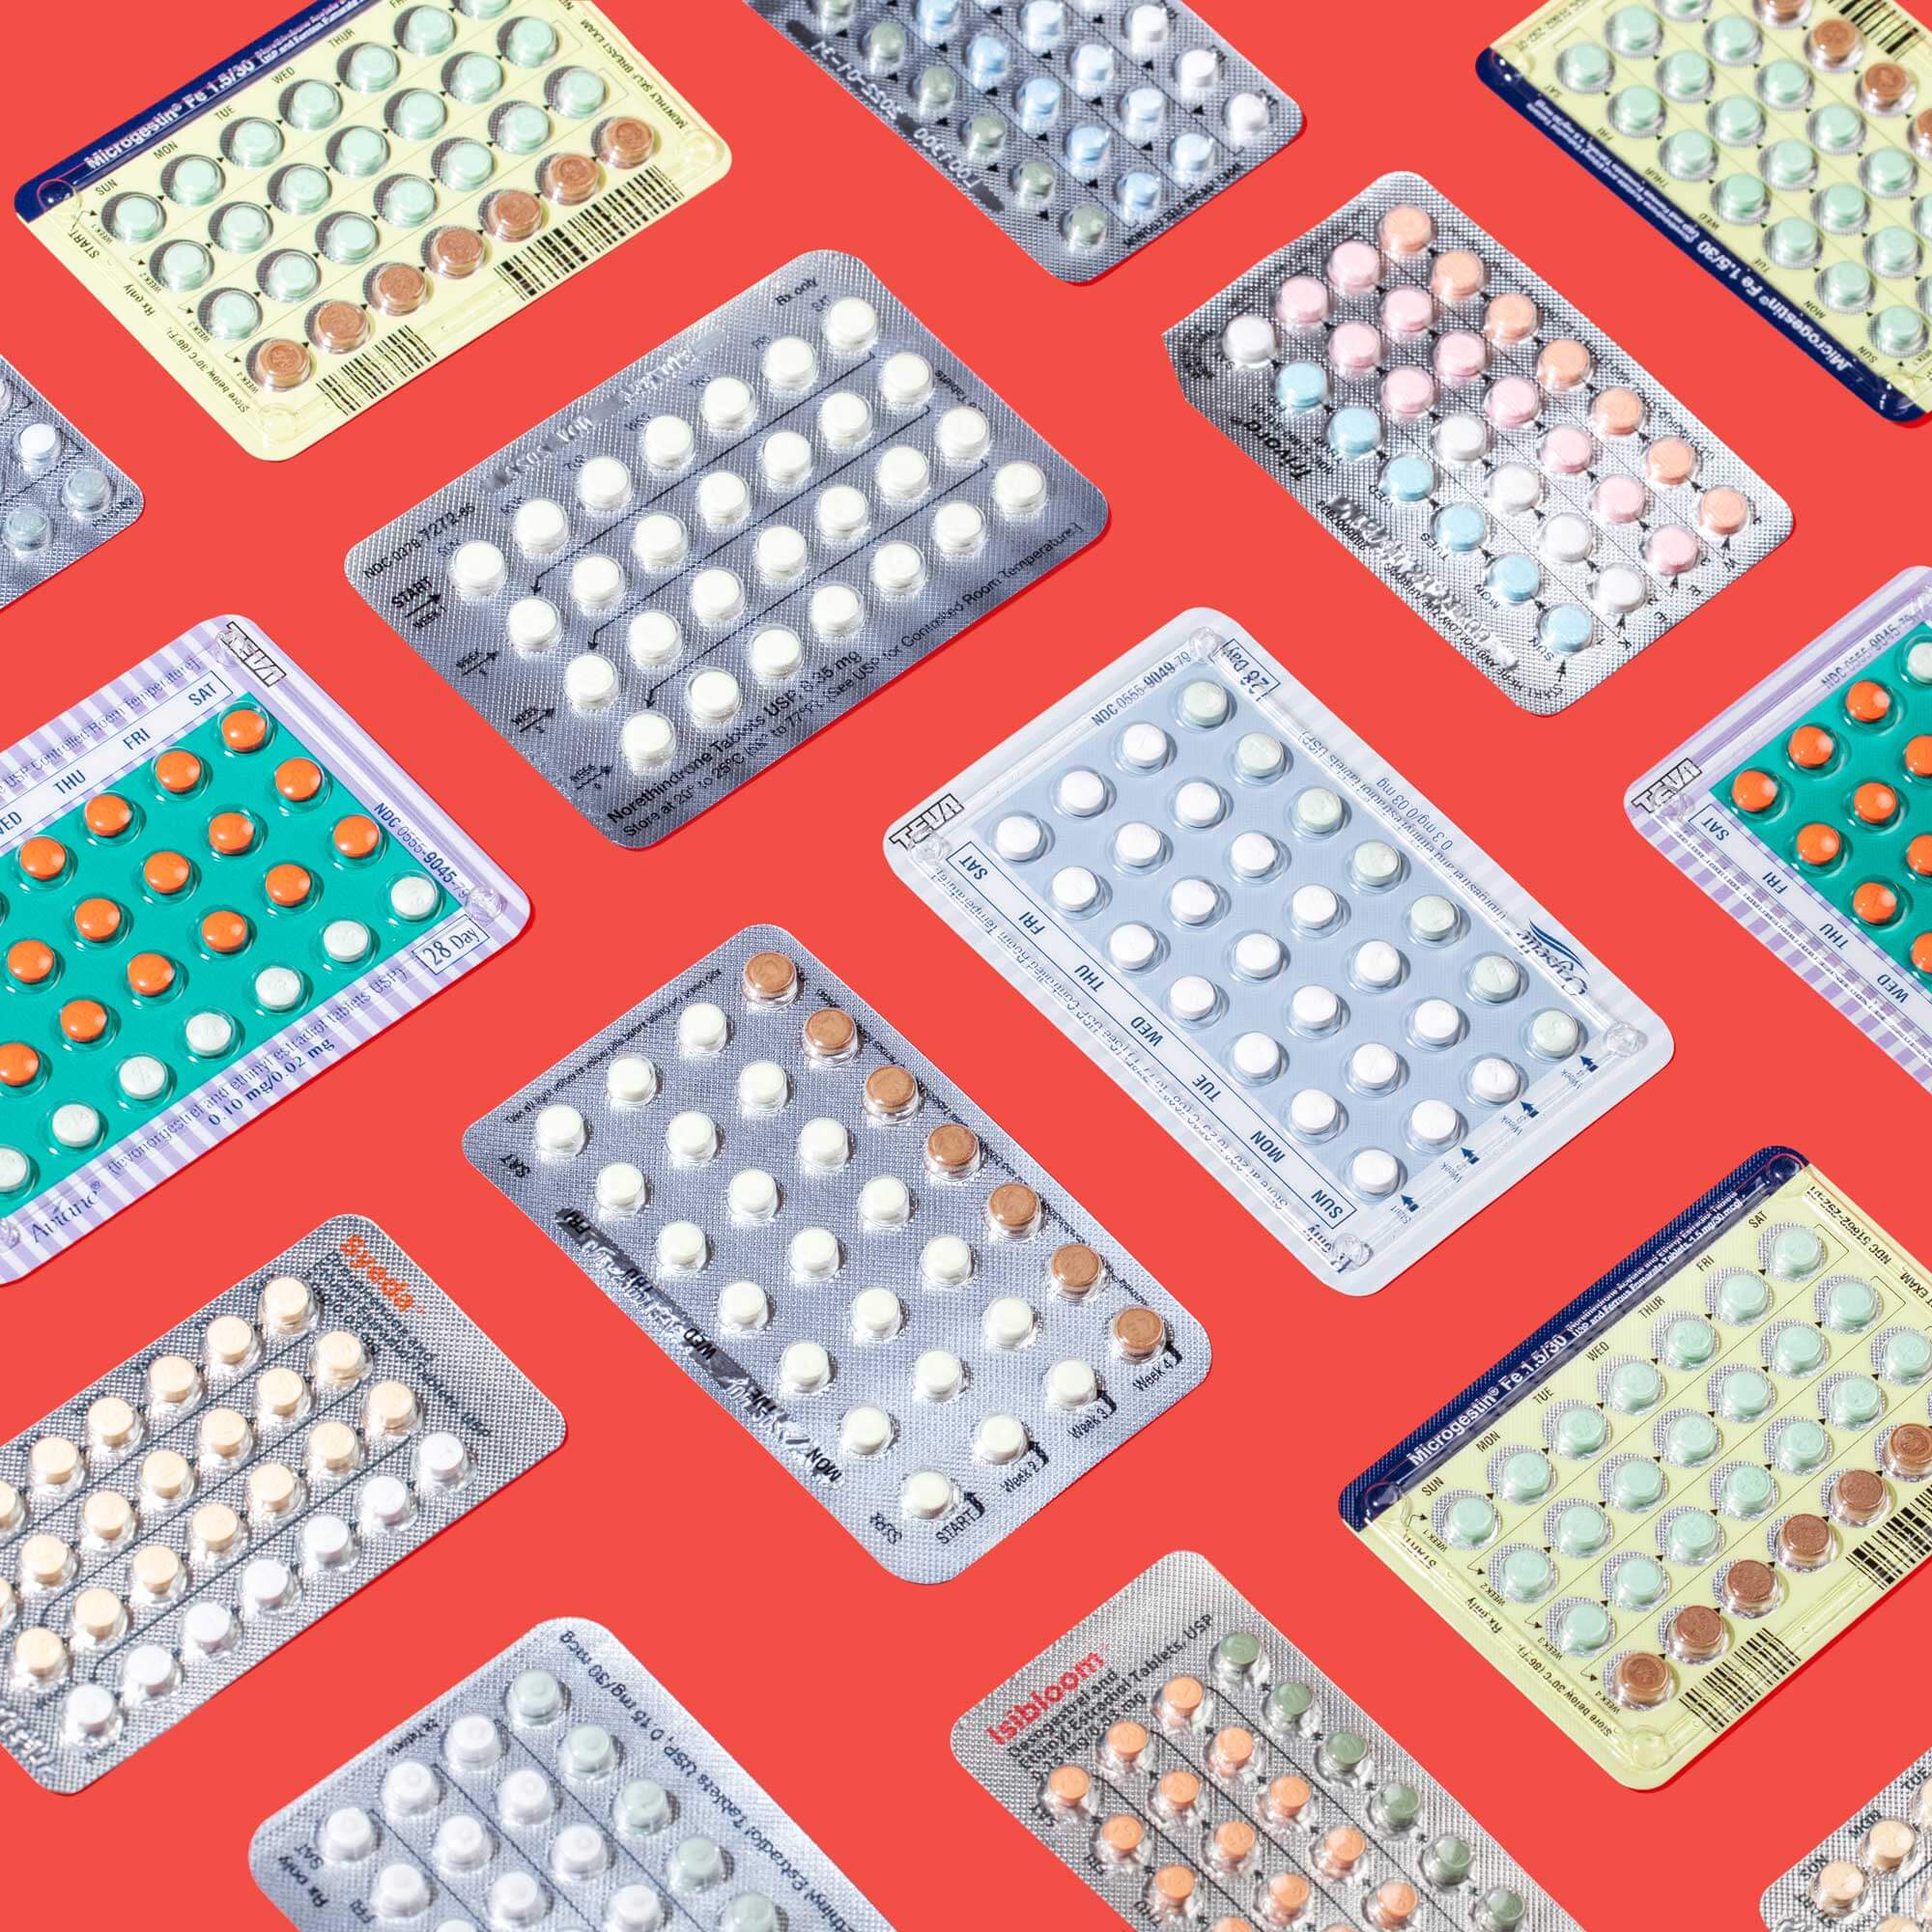 Several colorful birth control packets on a red background